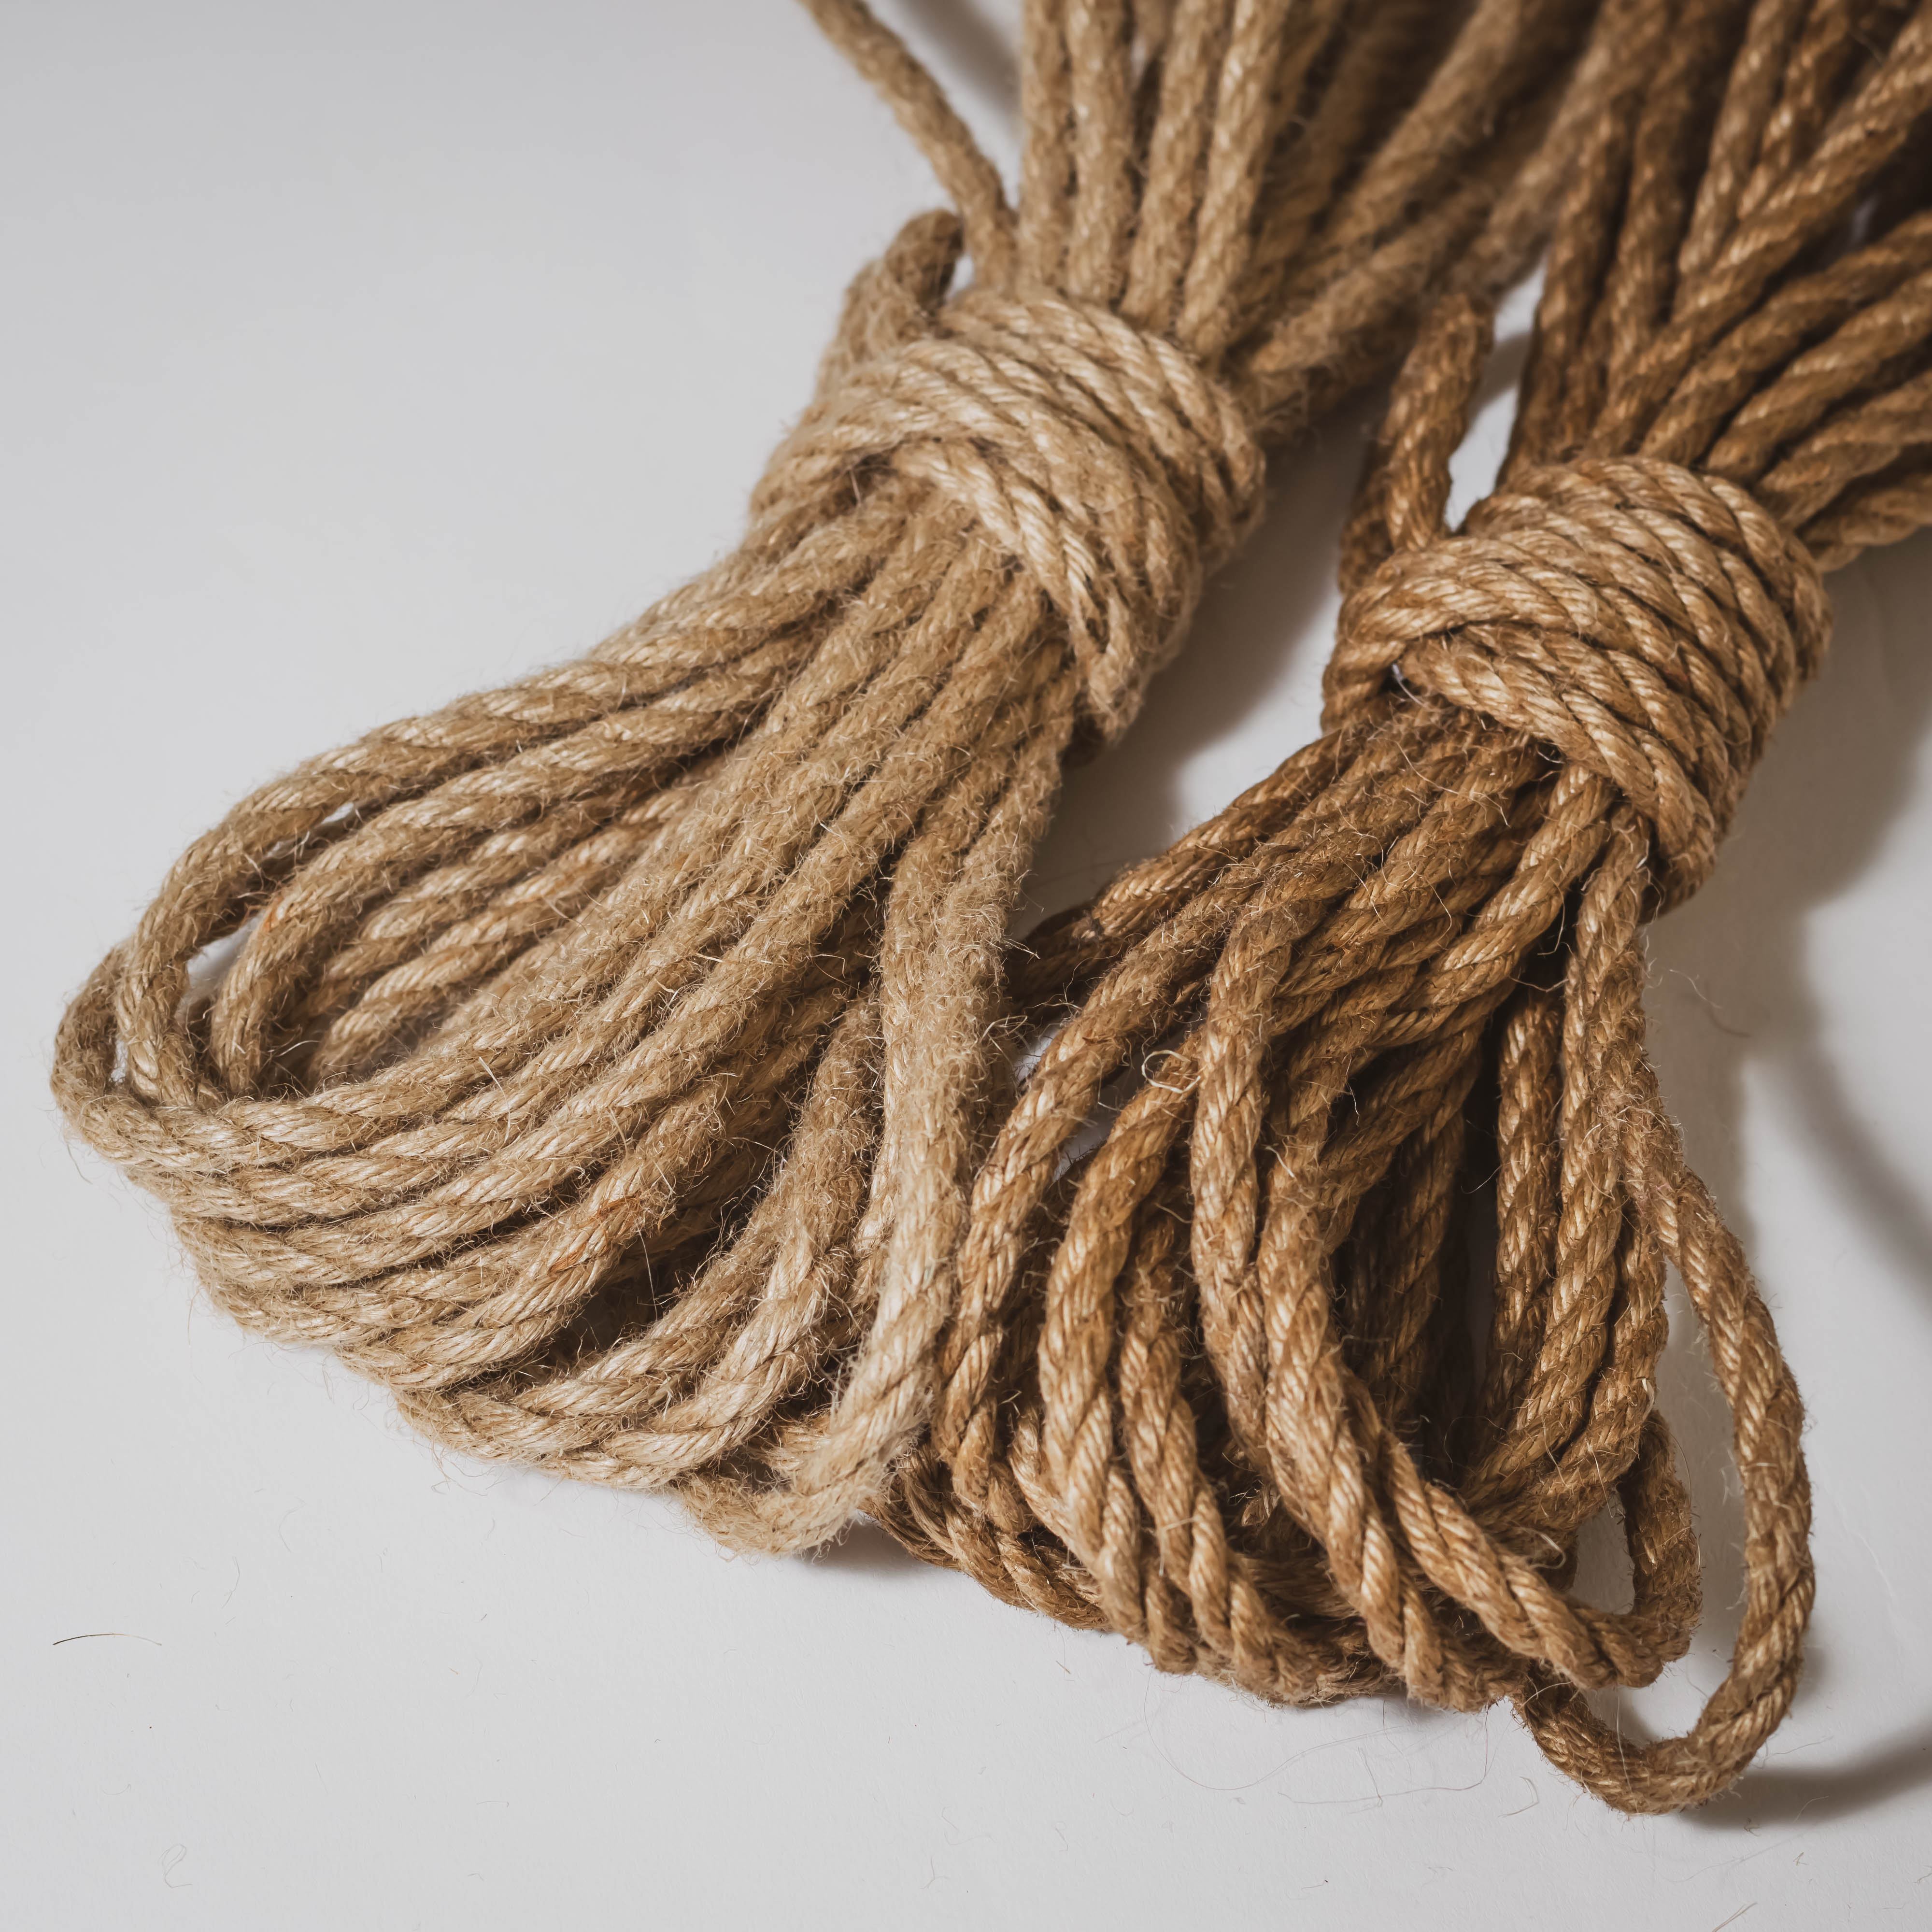 100% Natural Strong Jute Rope - LUOOV 6mm Thickness and Jute Rope